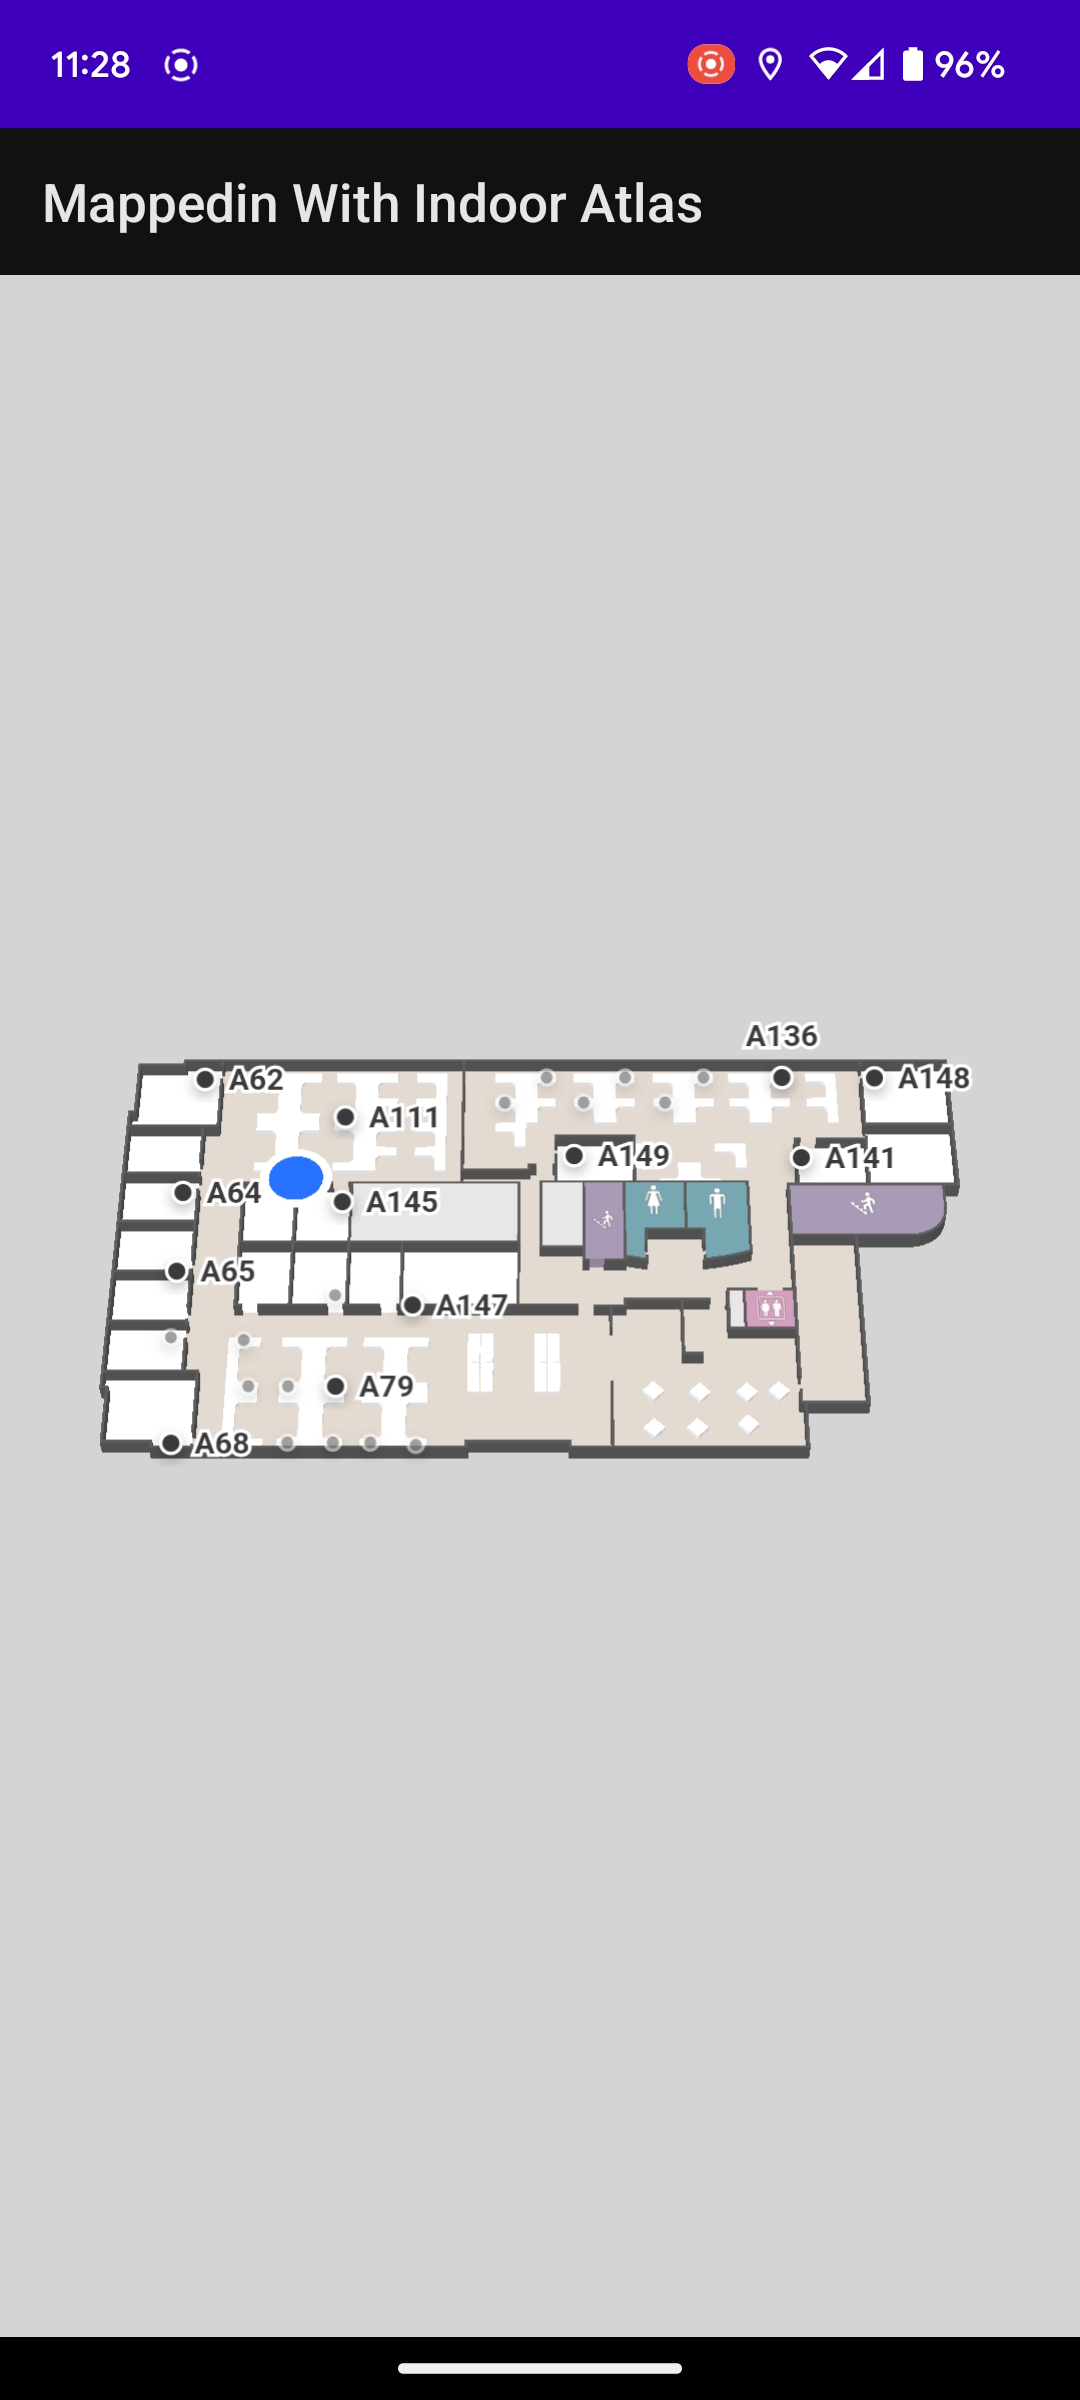 Office map with moving blue dot showing the user's location.